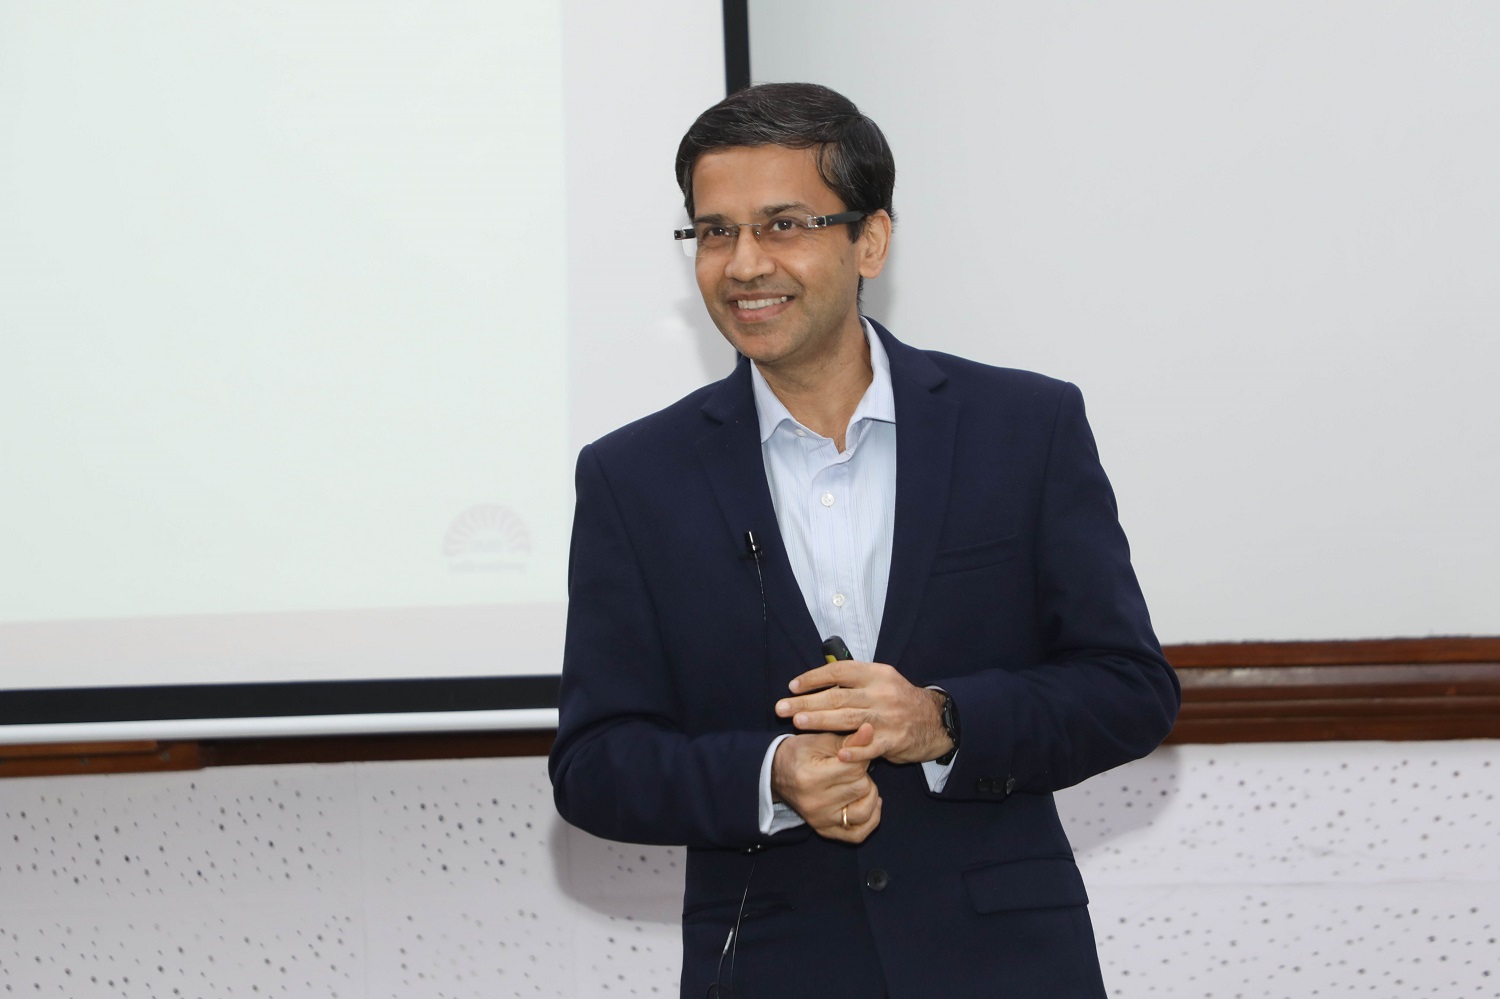 Prof. Sourav Mukherji, Dean, Alumni Relations & Development and faculty in the Organizational Behavior & Human Resources Management area, IIMB, conducts a session on: ‘Ethical AI and Leadership Challenges: The Case of Google’.